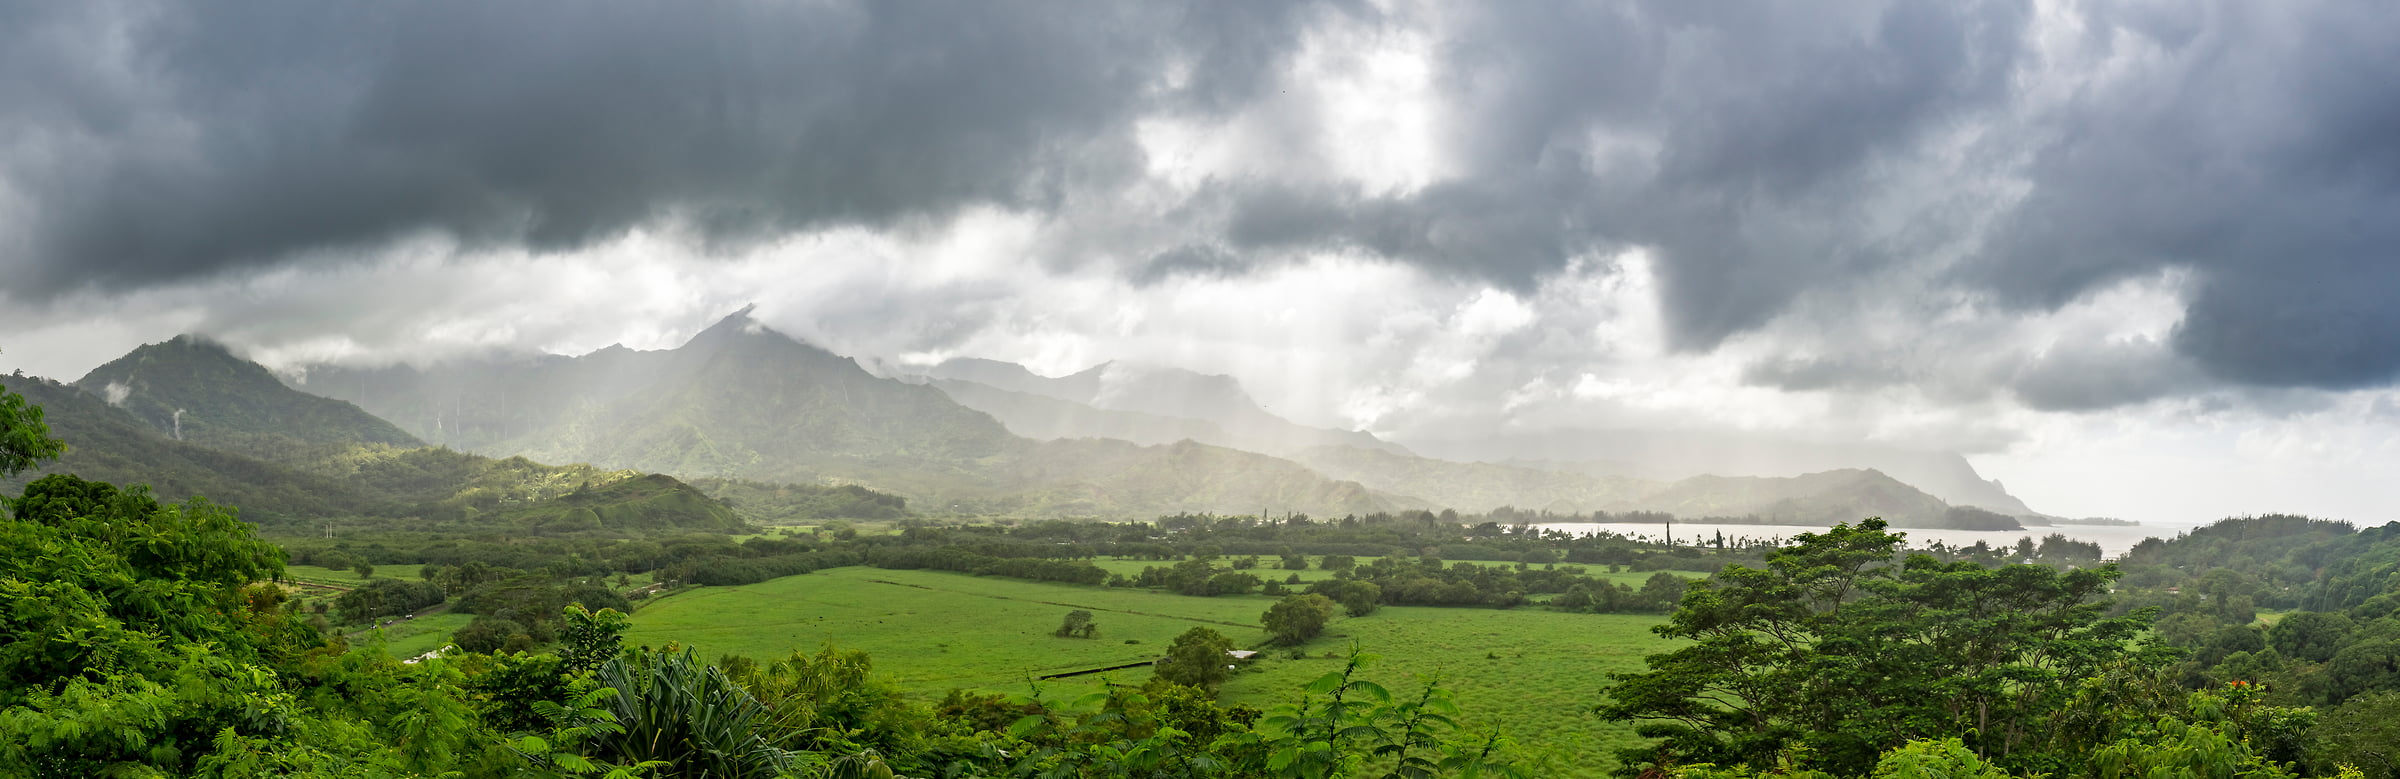 91 megapixels! A very high resolution, large-format VAST photo print of Hanalei Bay in Kauai, Hawaii; tropical landscape photo created by Justin Katz